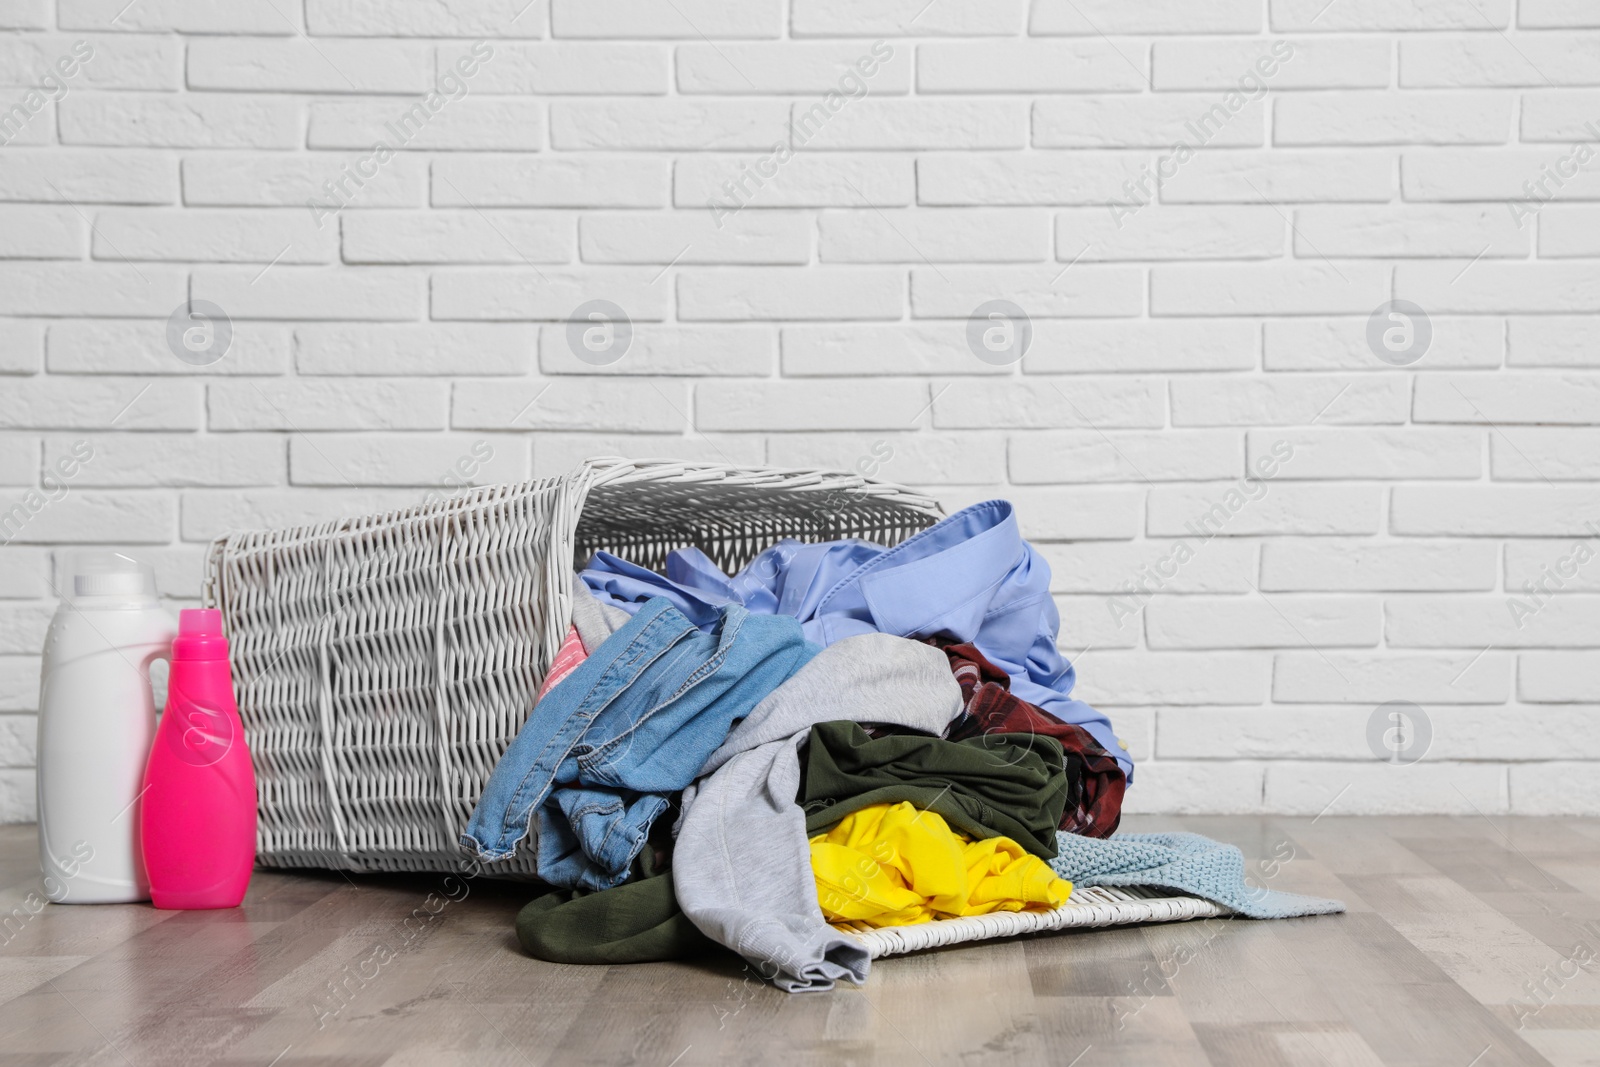 Photo of Laundry basket, dirty clothes and detergents on floor near brick wall. Space for text